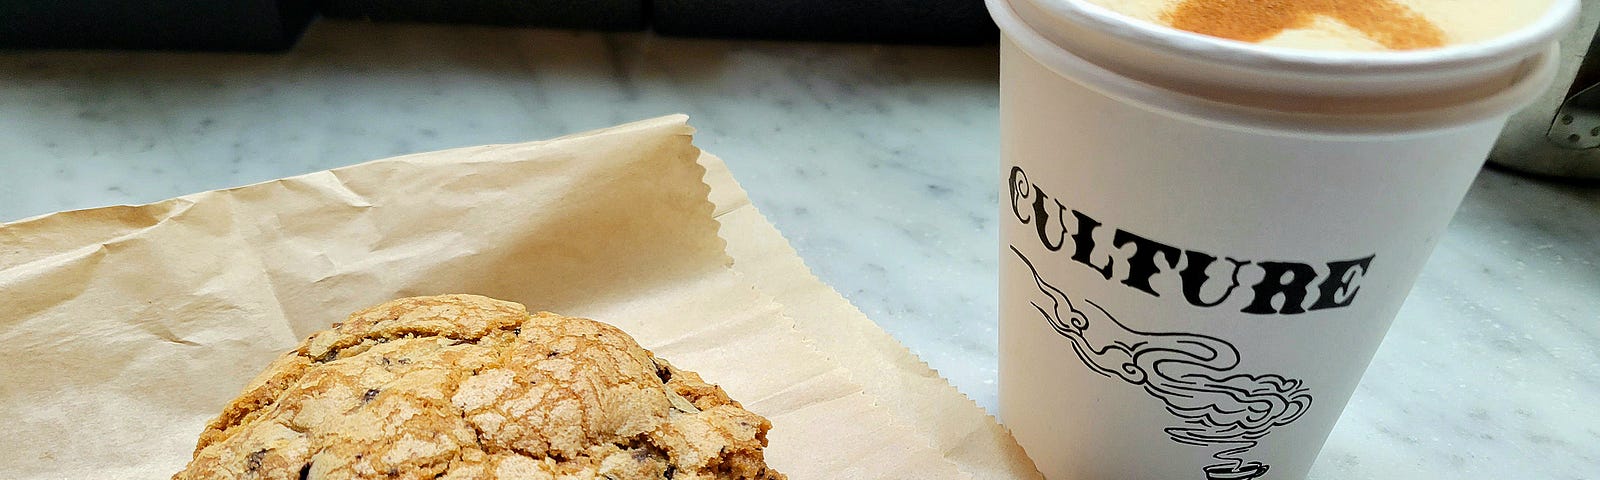 Chocolate chip cookie and coffee drink on marble counter